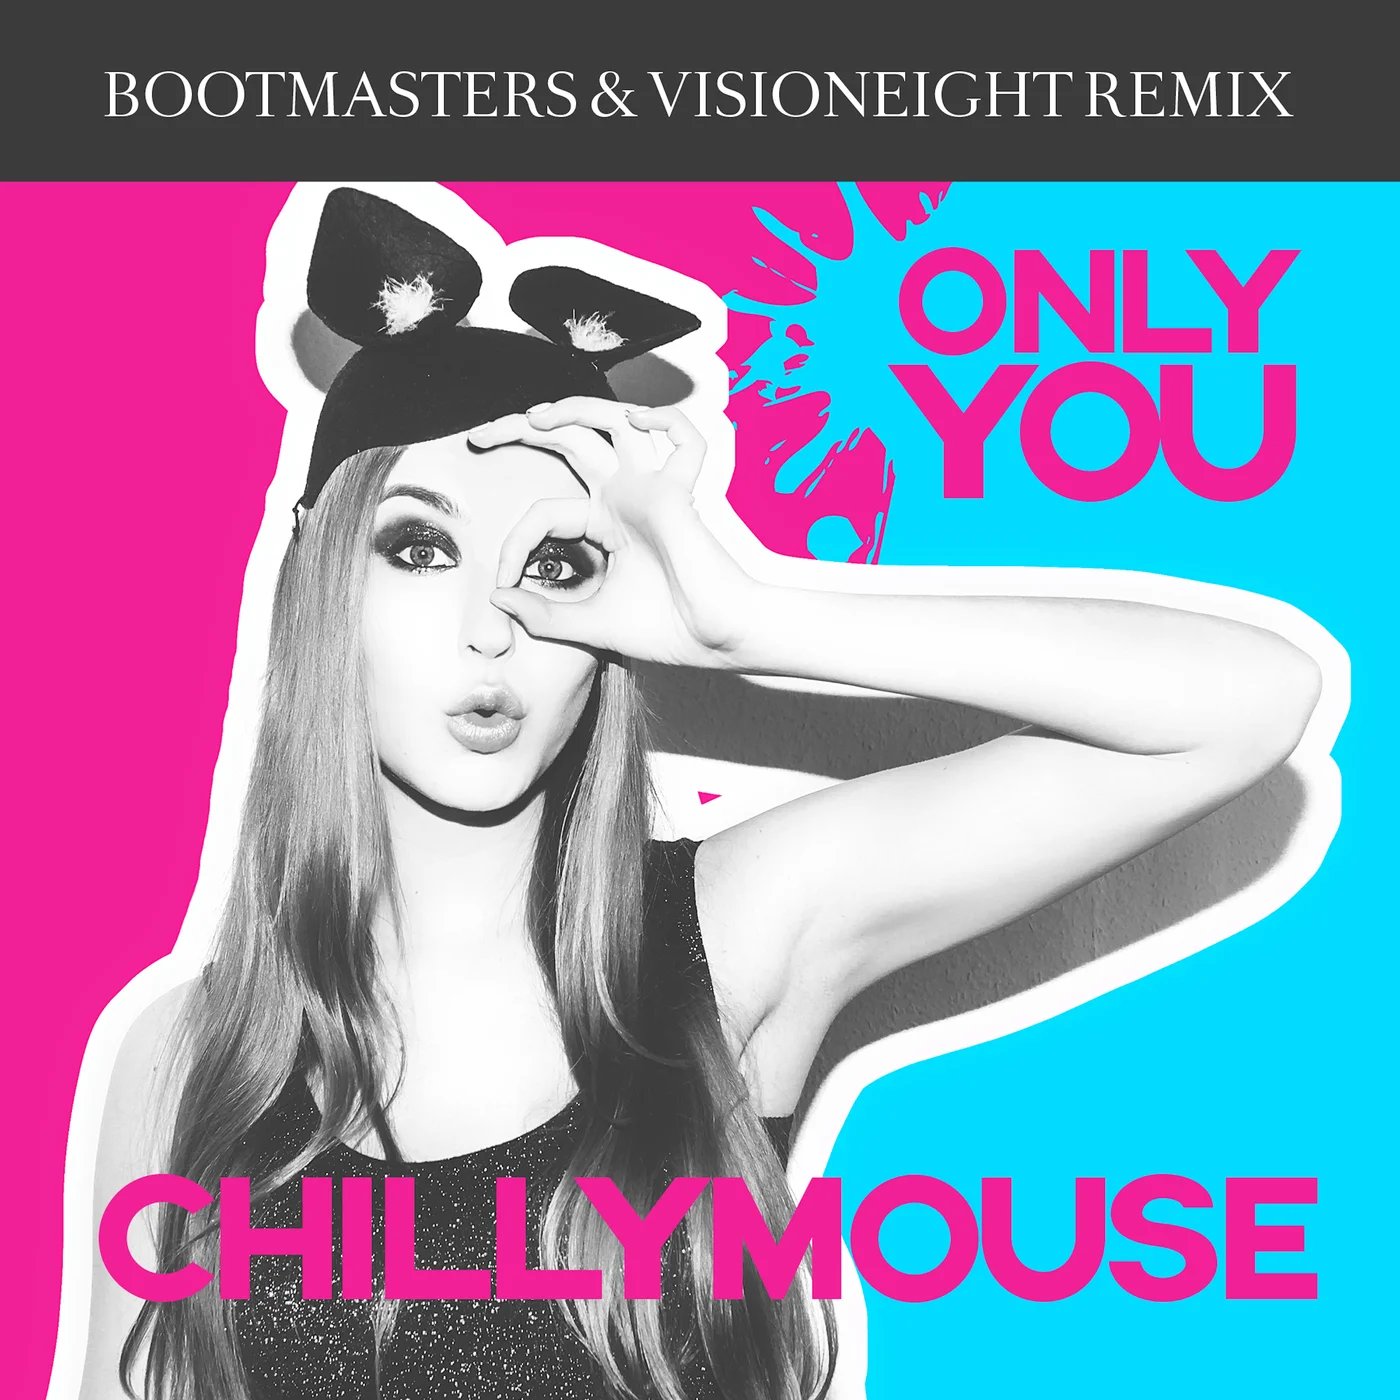 Extended remix mp3. Chillymouse - you re my Love, you re my Life (Dino NILUKKI Remix). Chillymouse - boys (Summertime Love) [DJ Blackstone Remix Edit].